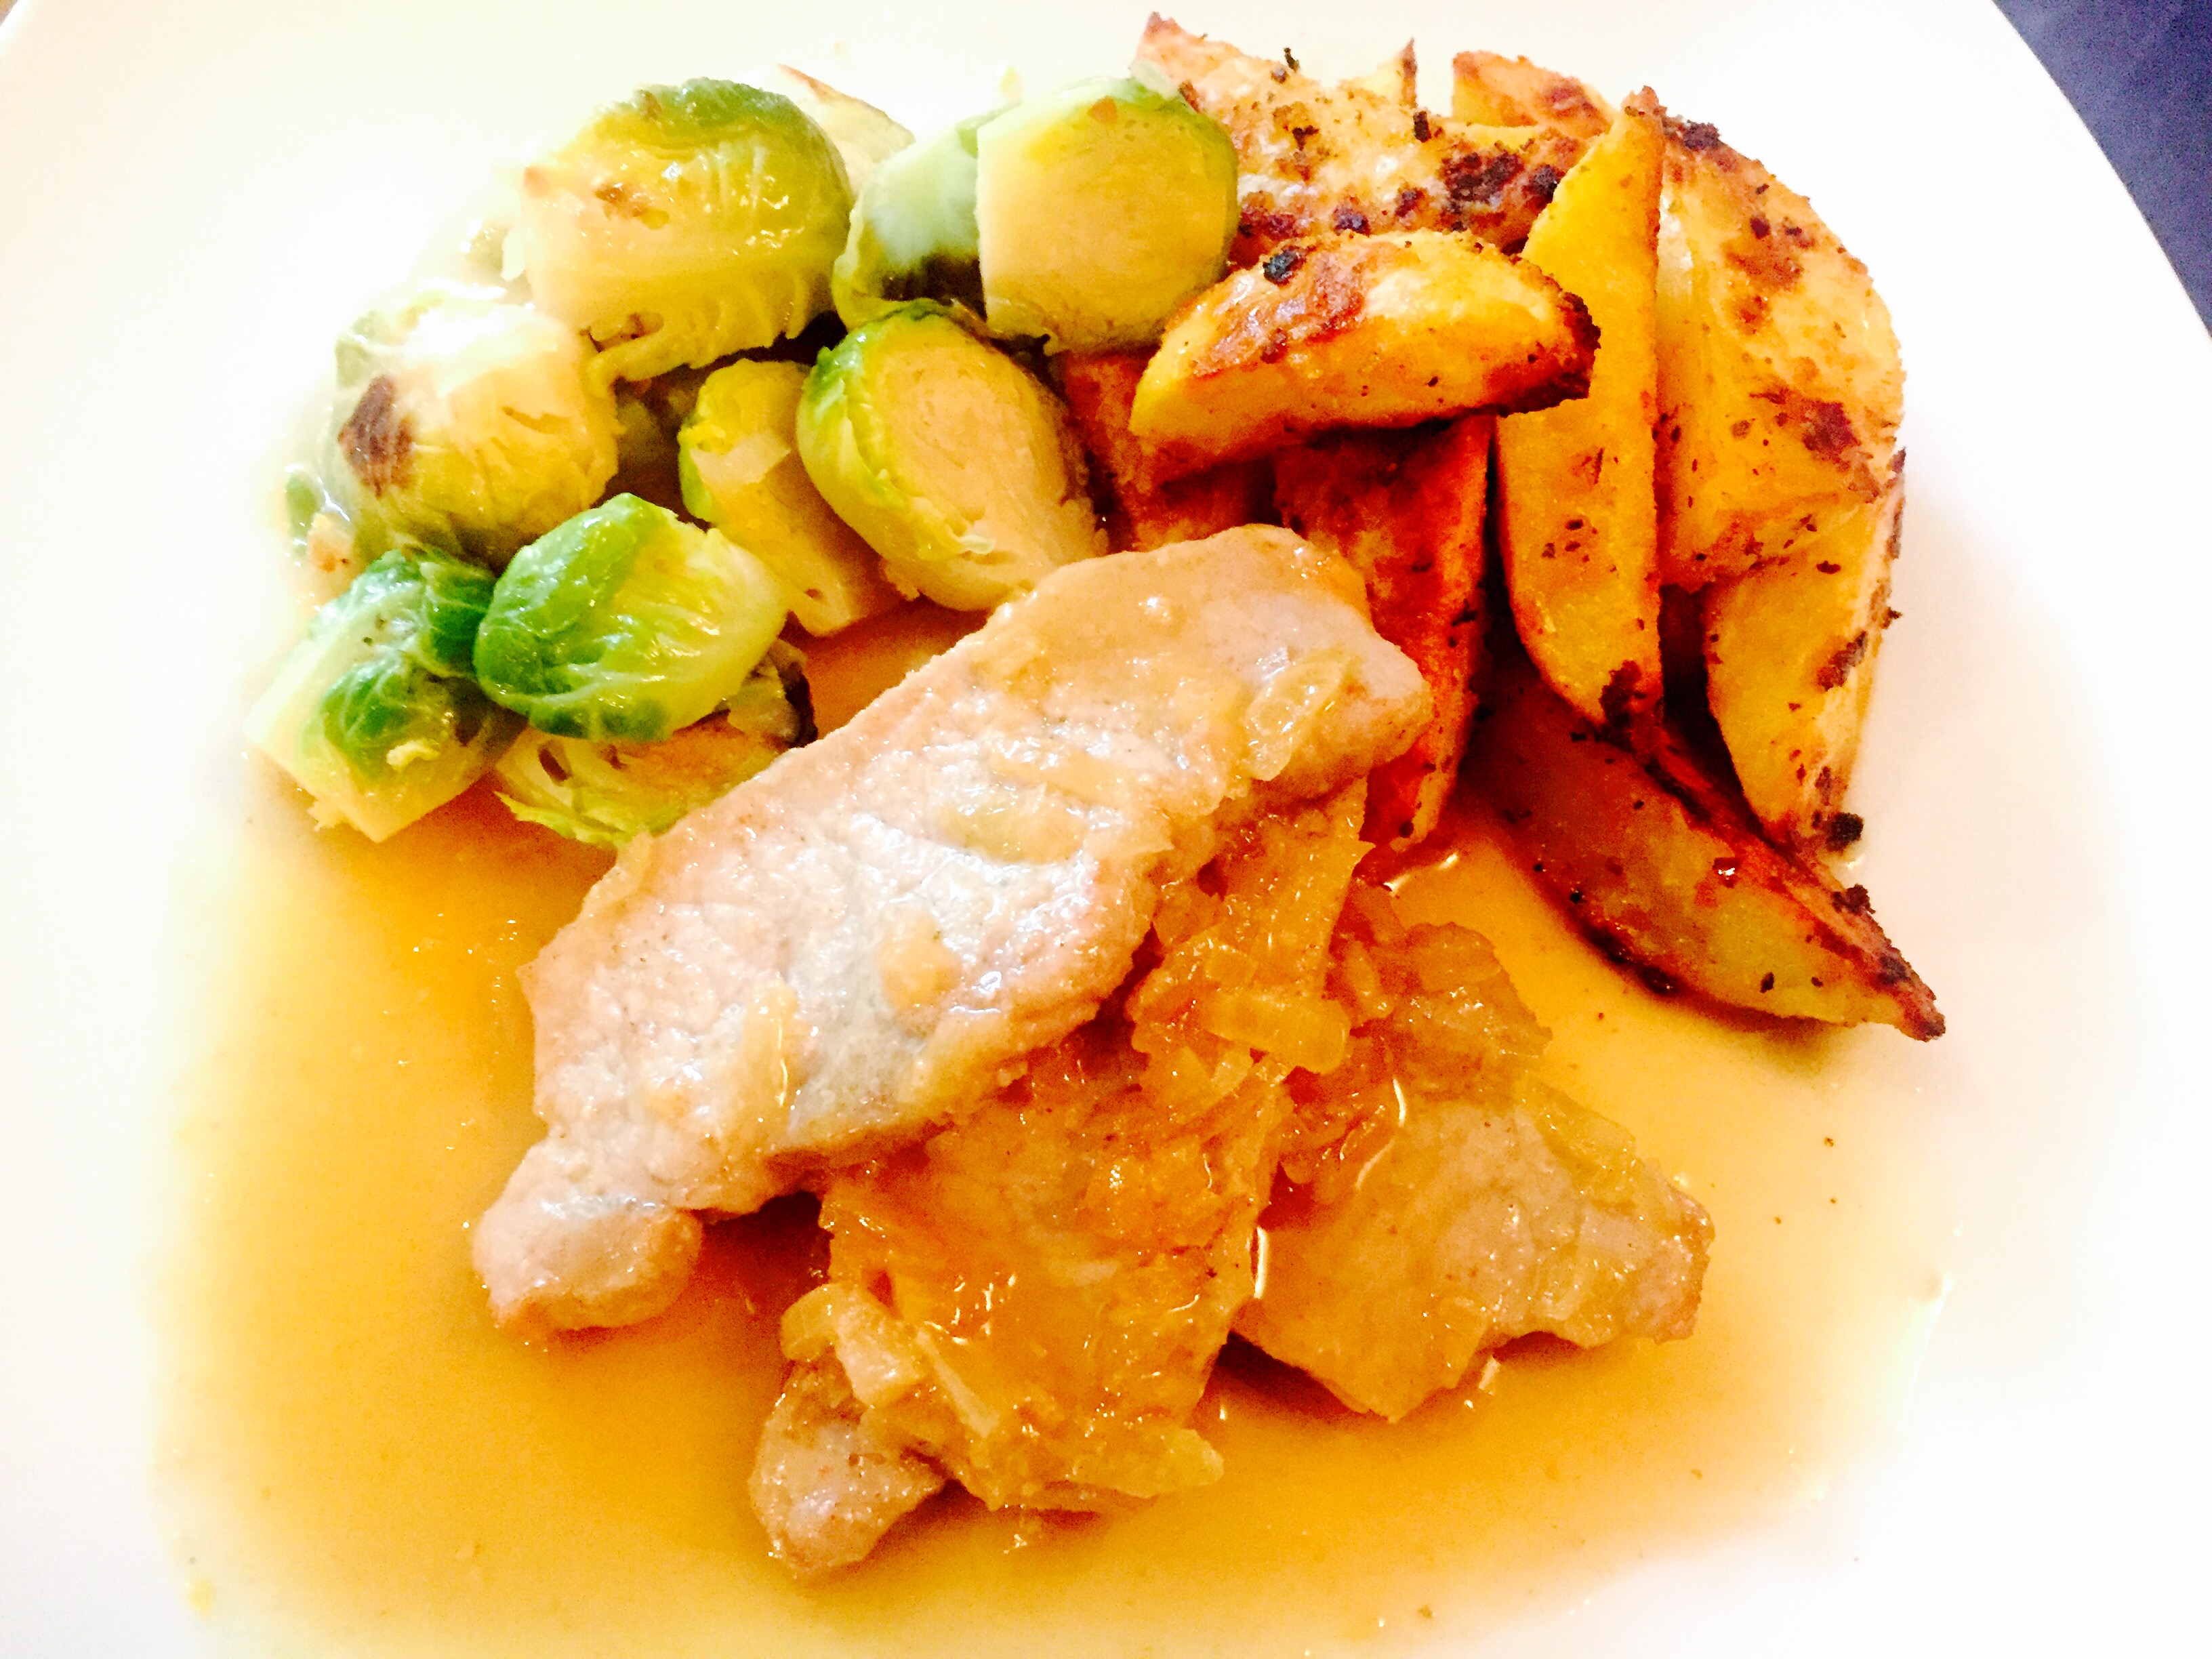 Braised Canadian maple mustard pork loin with tender sauteed brussel sprouts and delicious roasted home fries ... Happy Canada Day!!